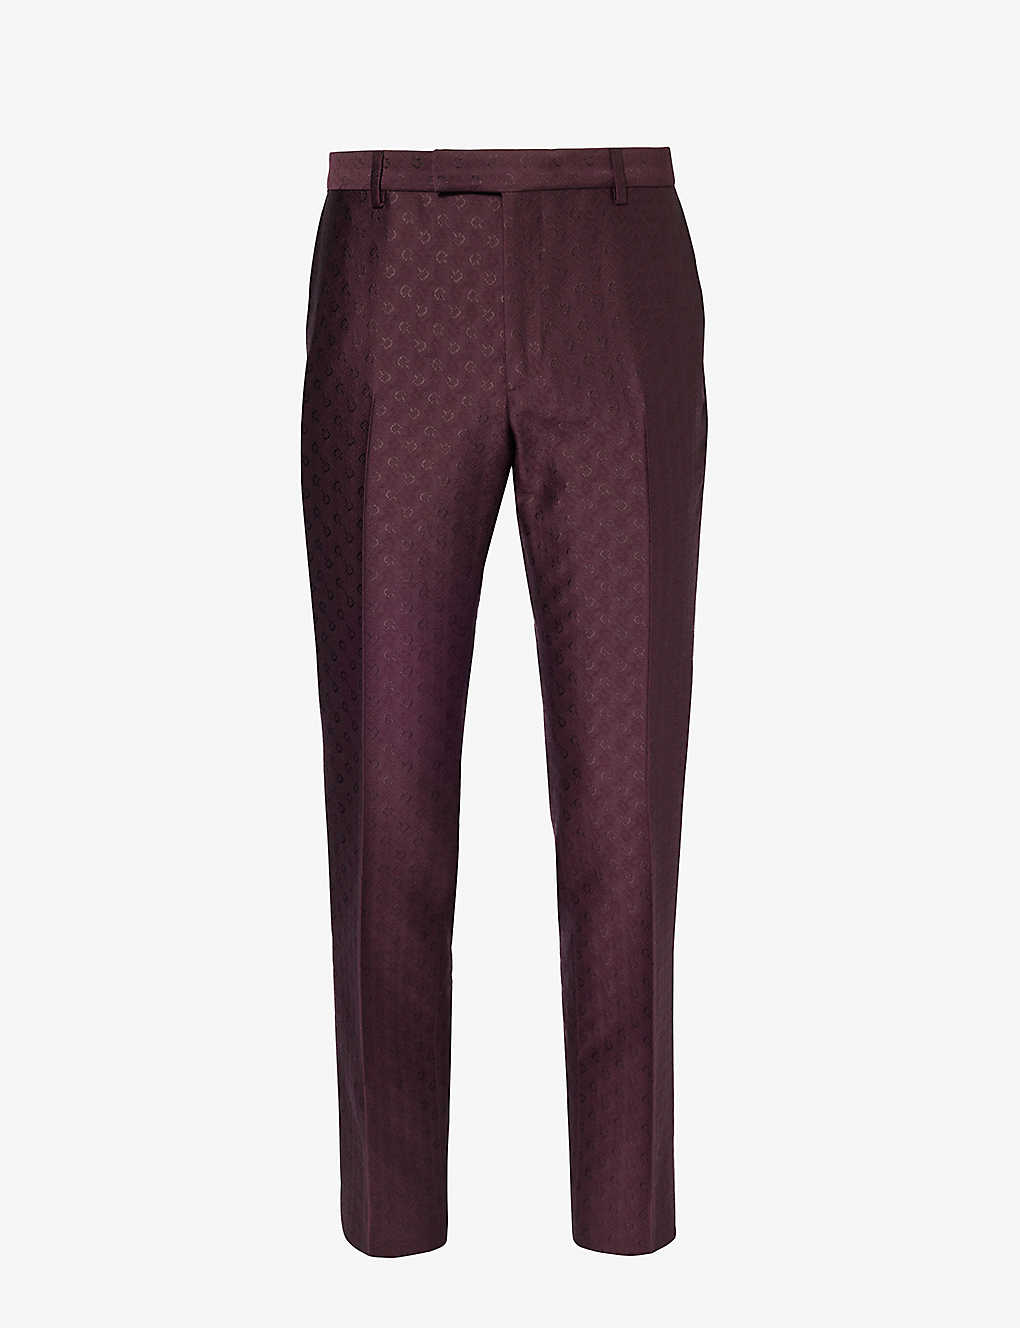 Gucci Mens Faded Wine Horsebit-patterned Slim-fit Mid-rise Wool-blend Trousers